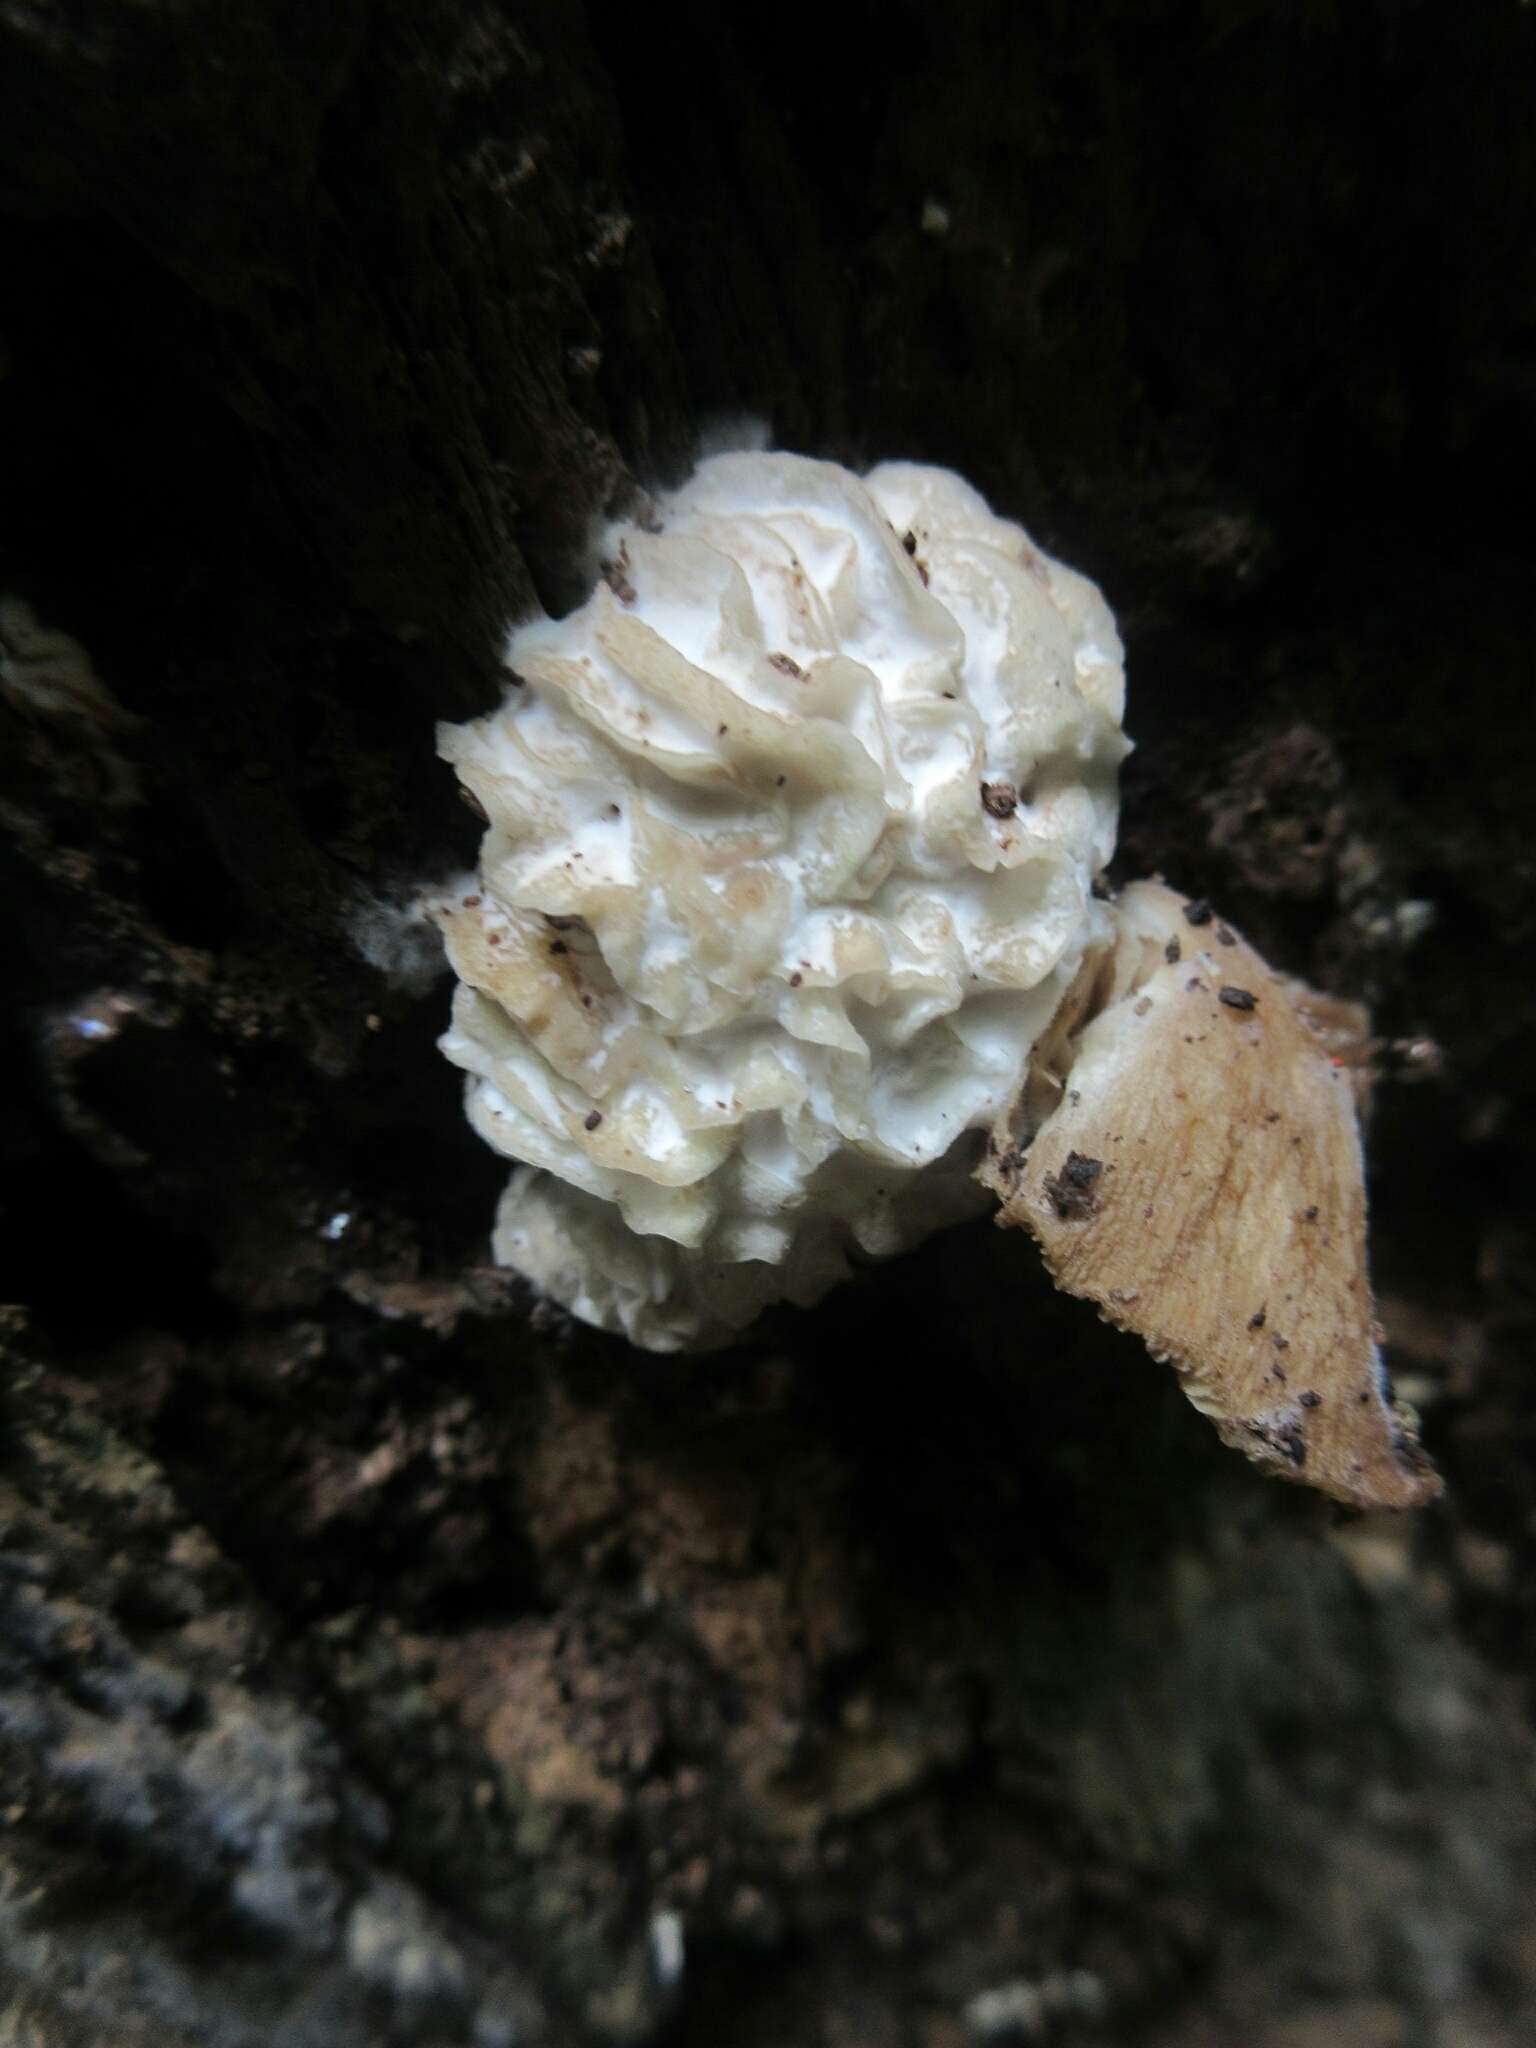 Image of Nectriopsis